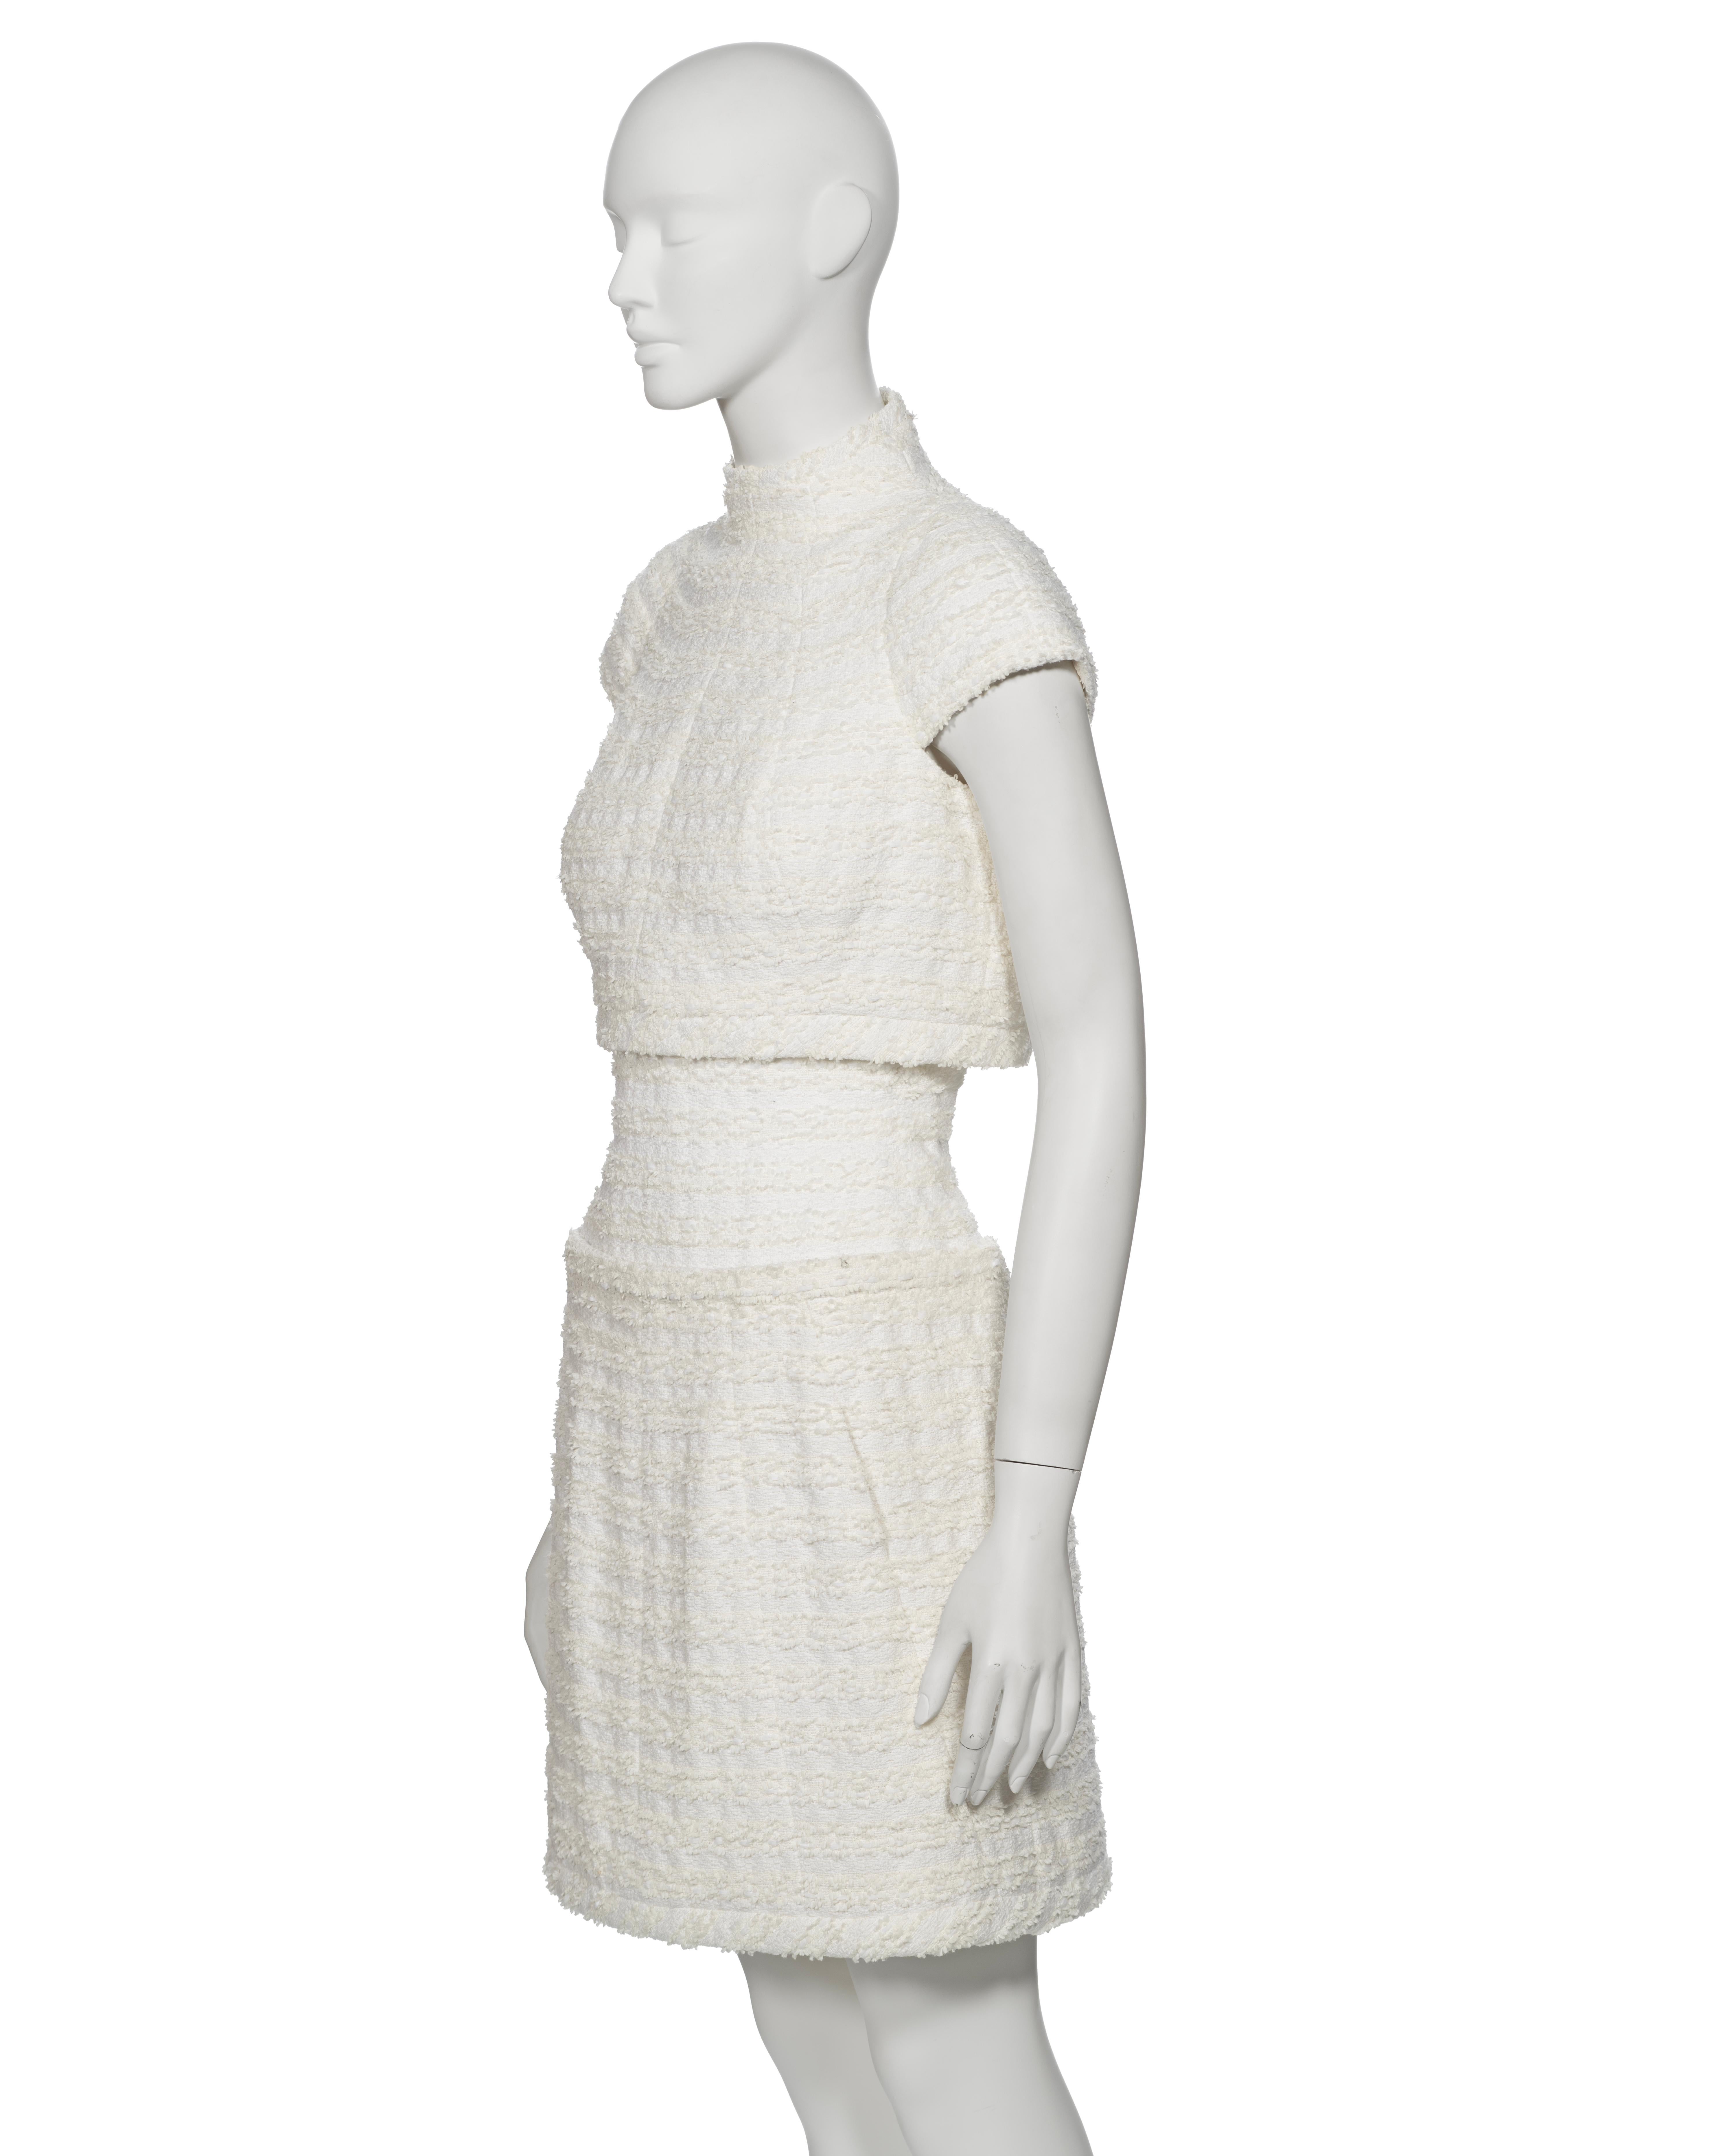 Chanel by Karl Lagerfeld Haute Couture White Bouclé Corseted Skirt Suit, ss 2014 For Sale 9